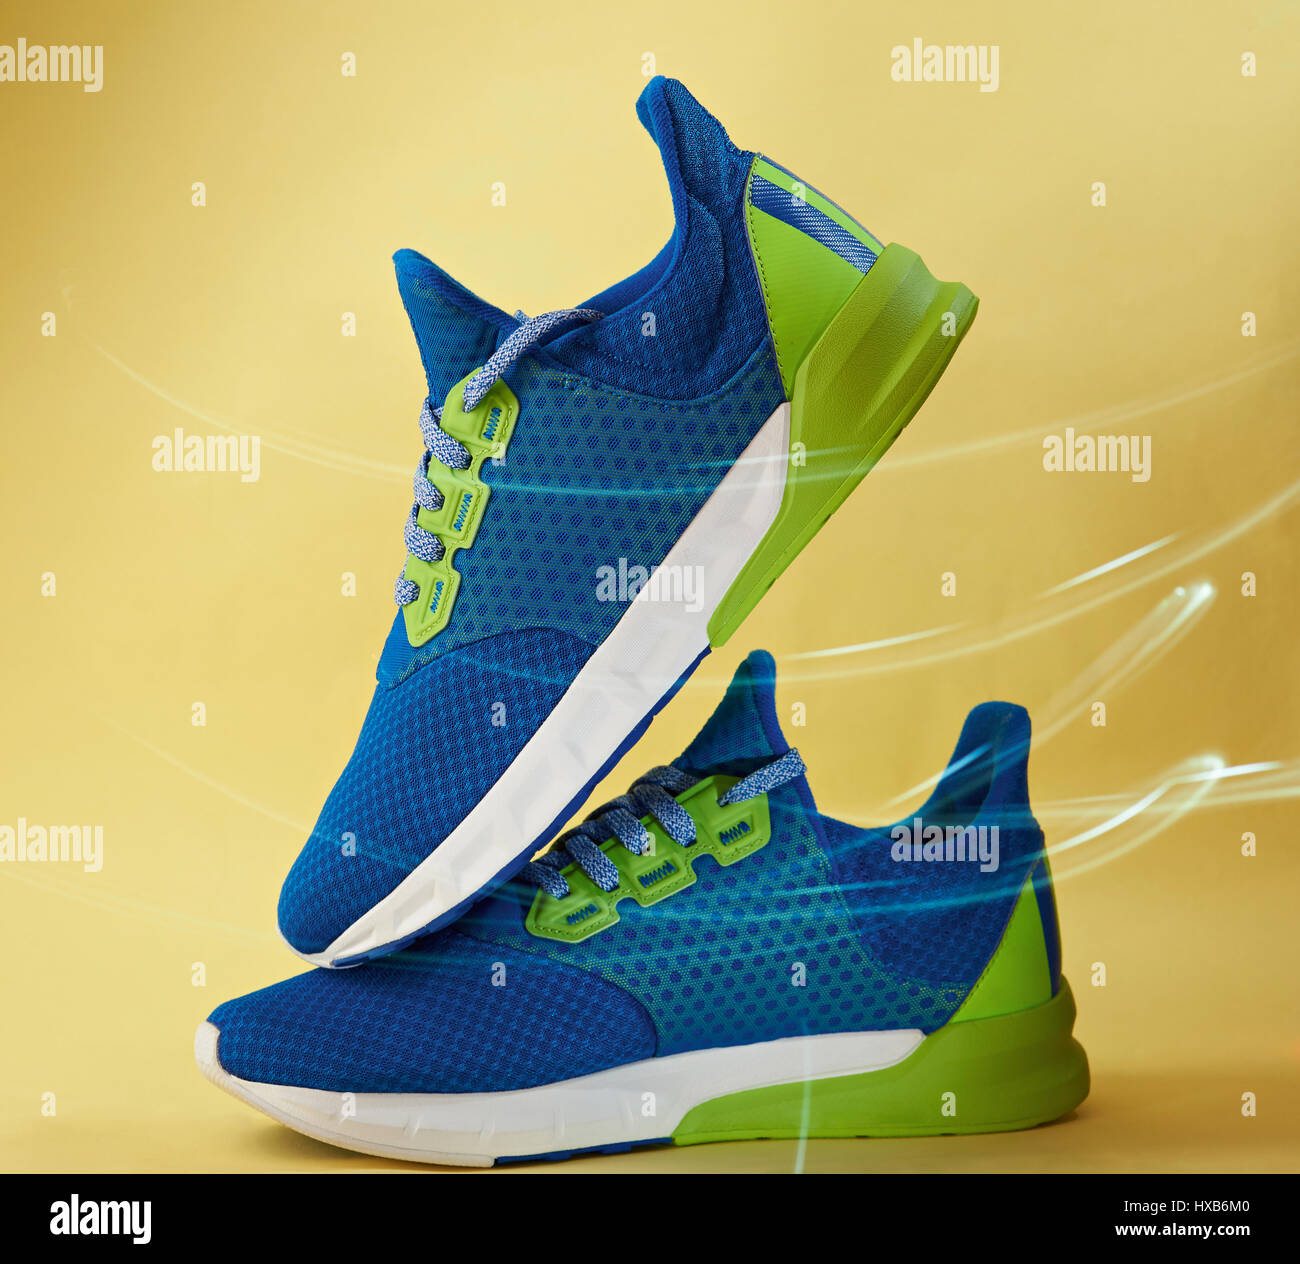 Brooks Launches Popular Shoes In Dazzling Colors - Women's Running